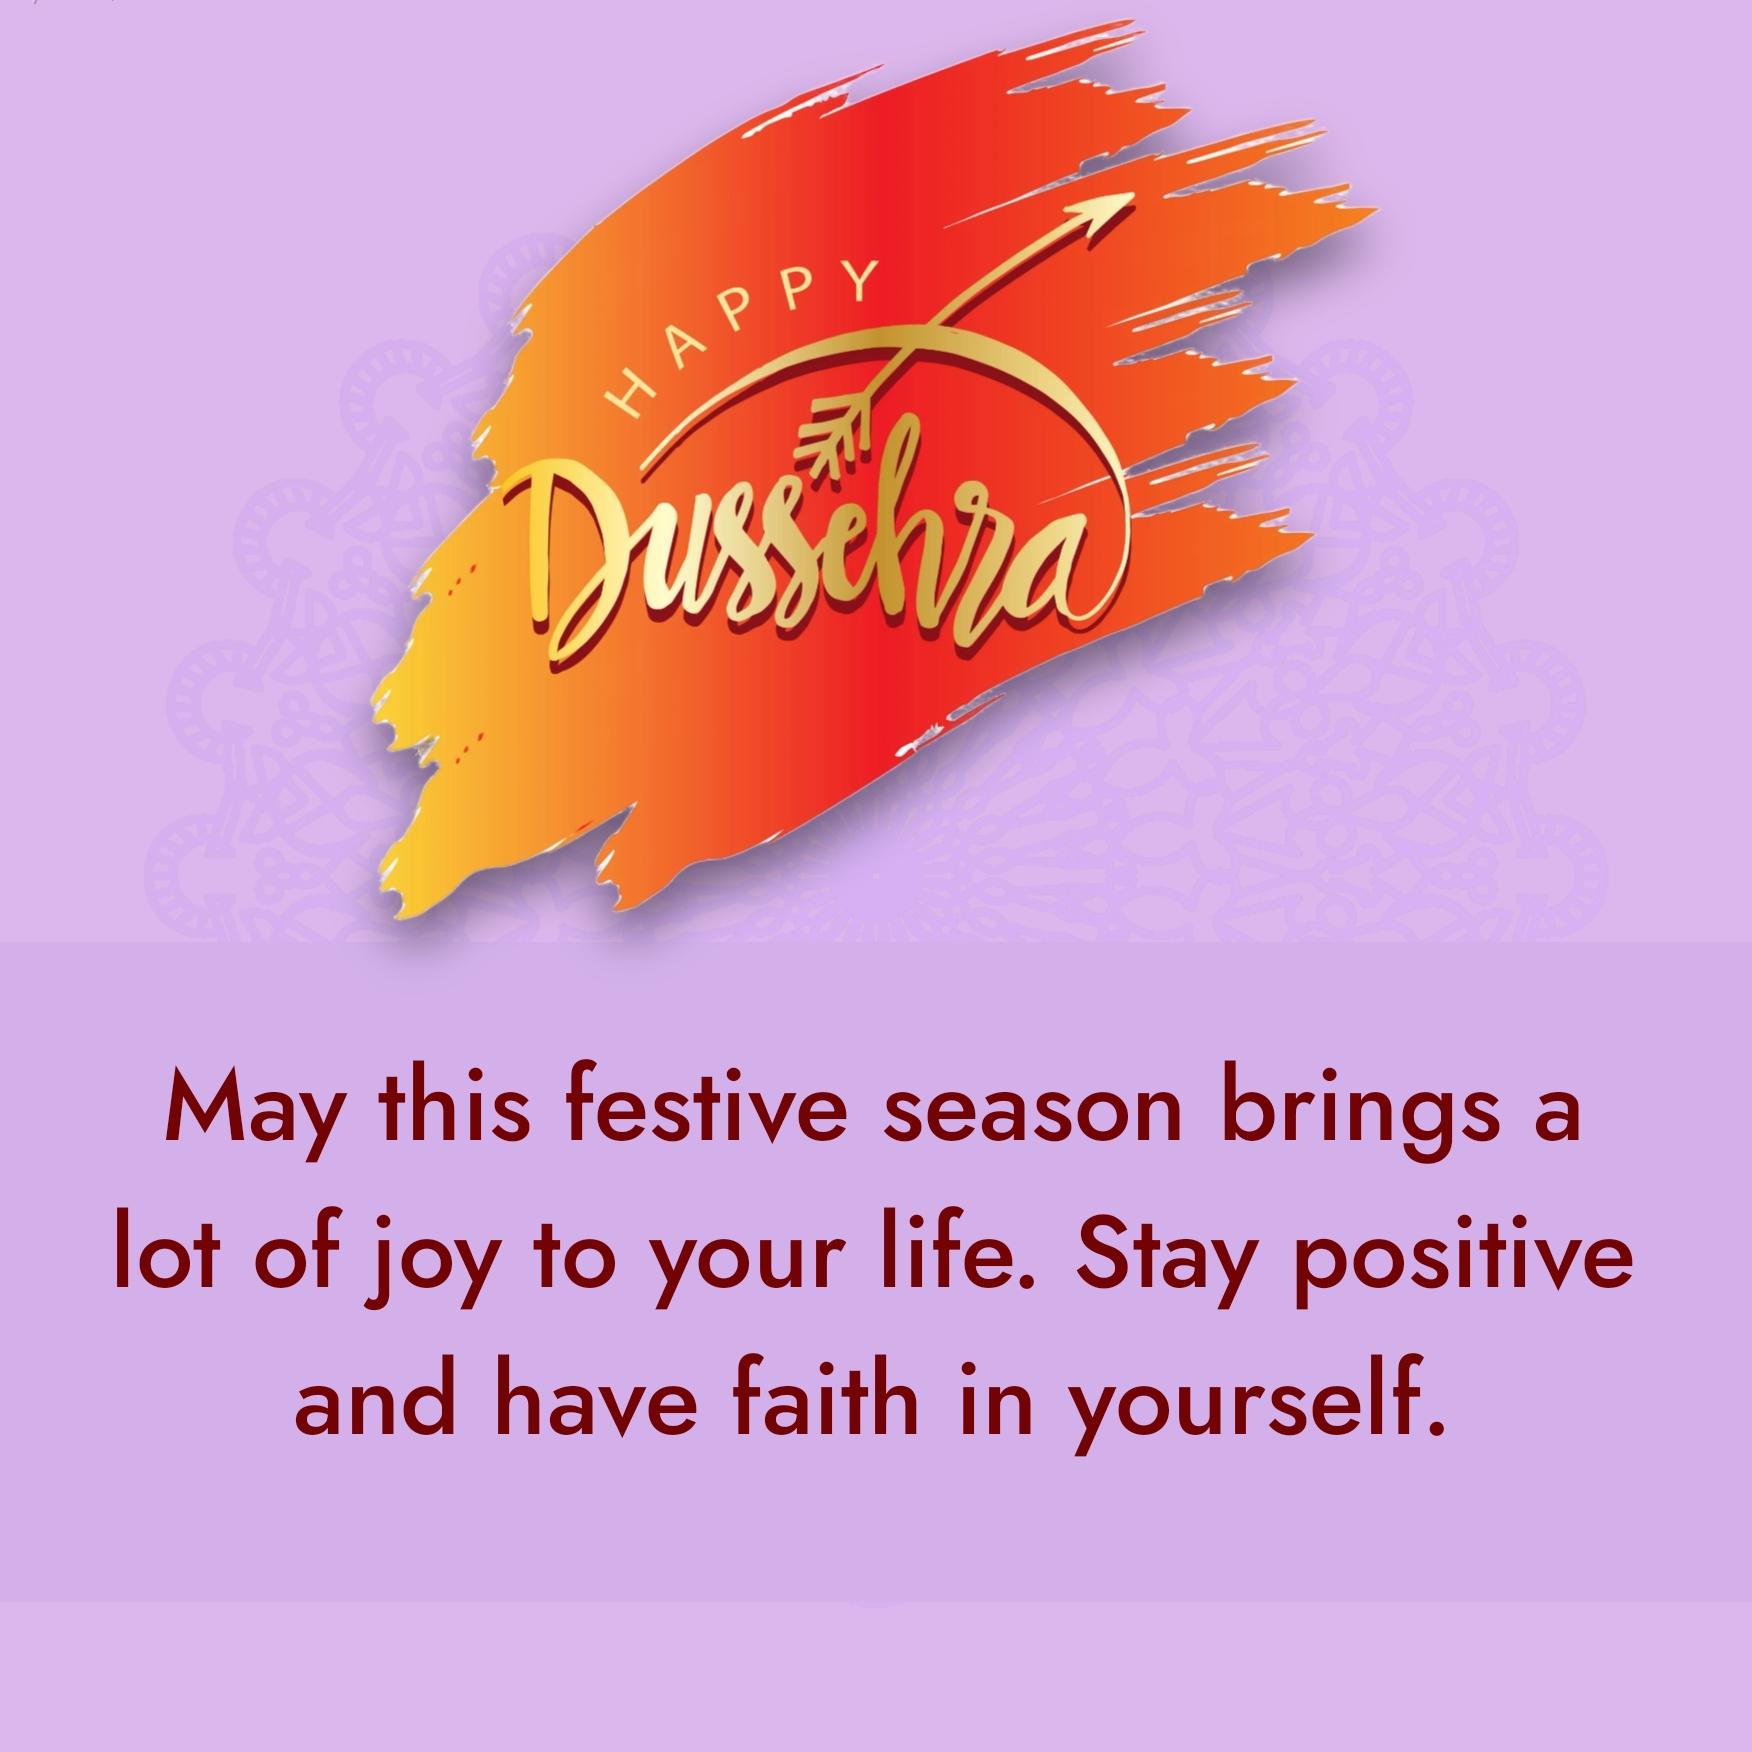 May this festive season brings a lot of joy to your life